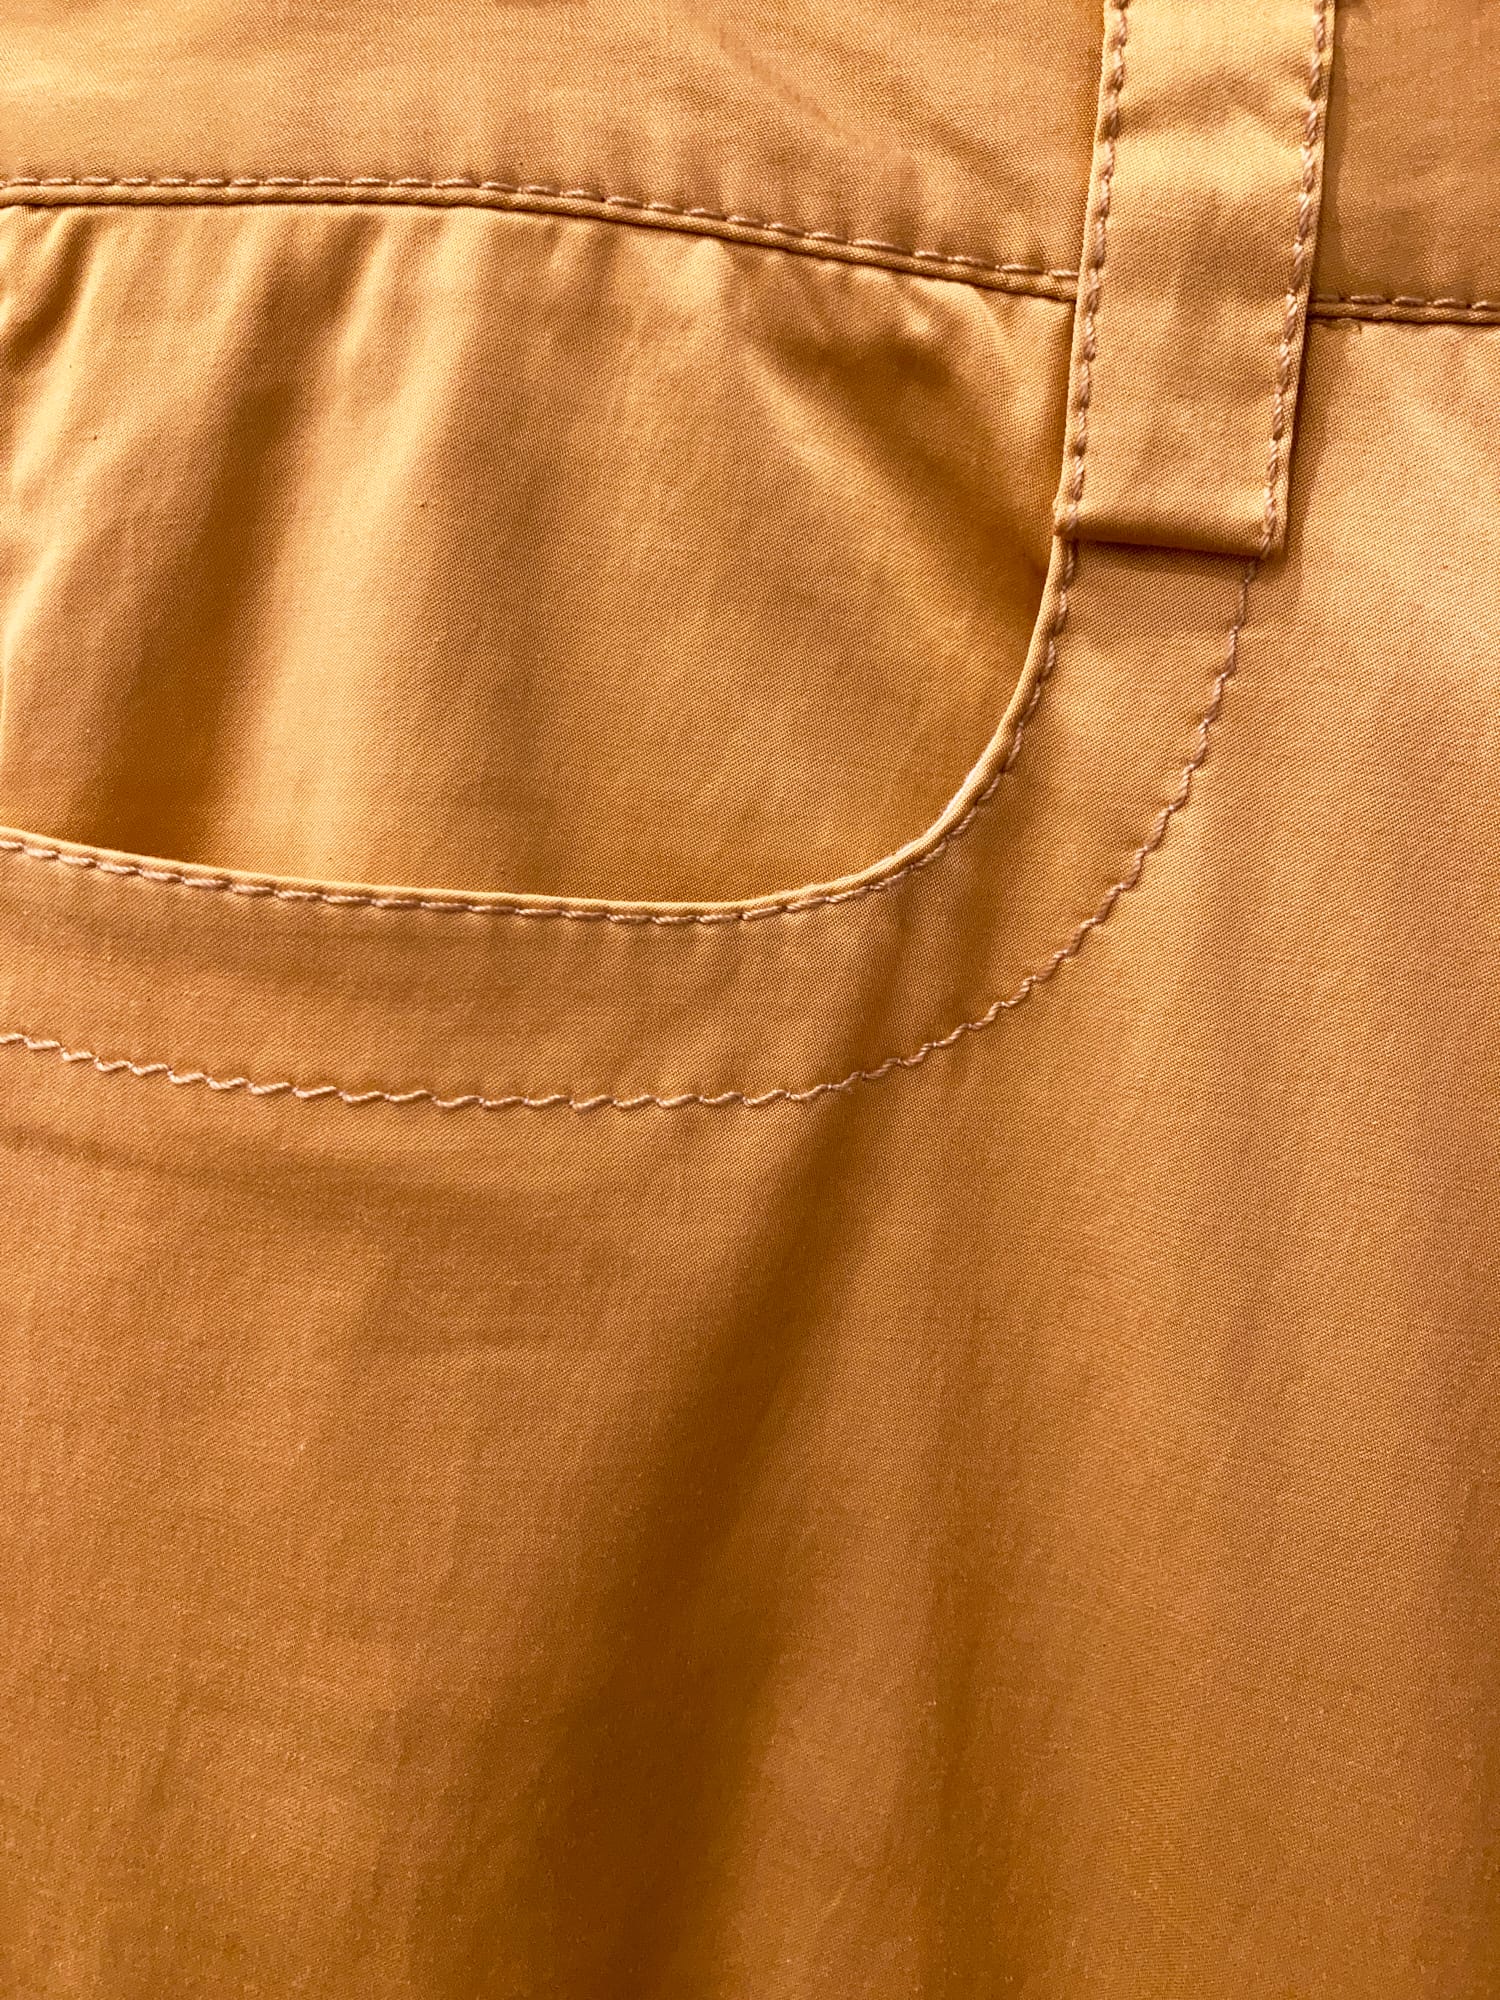 Dirk Bikkembergs 1990s 2000s sheeny gold gently flared trousers - size 40